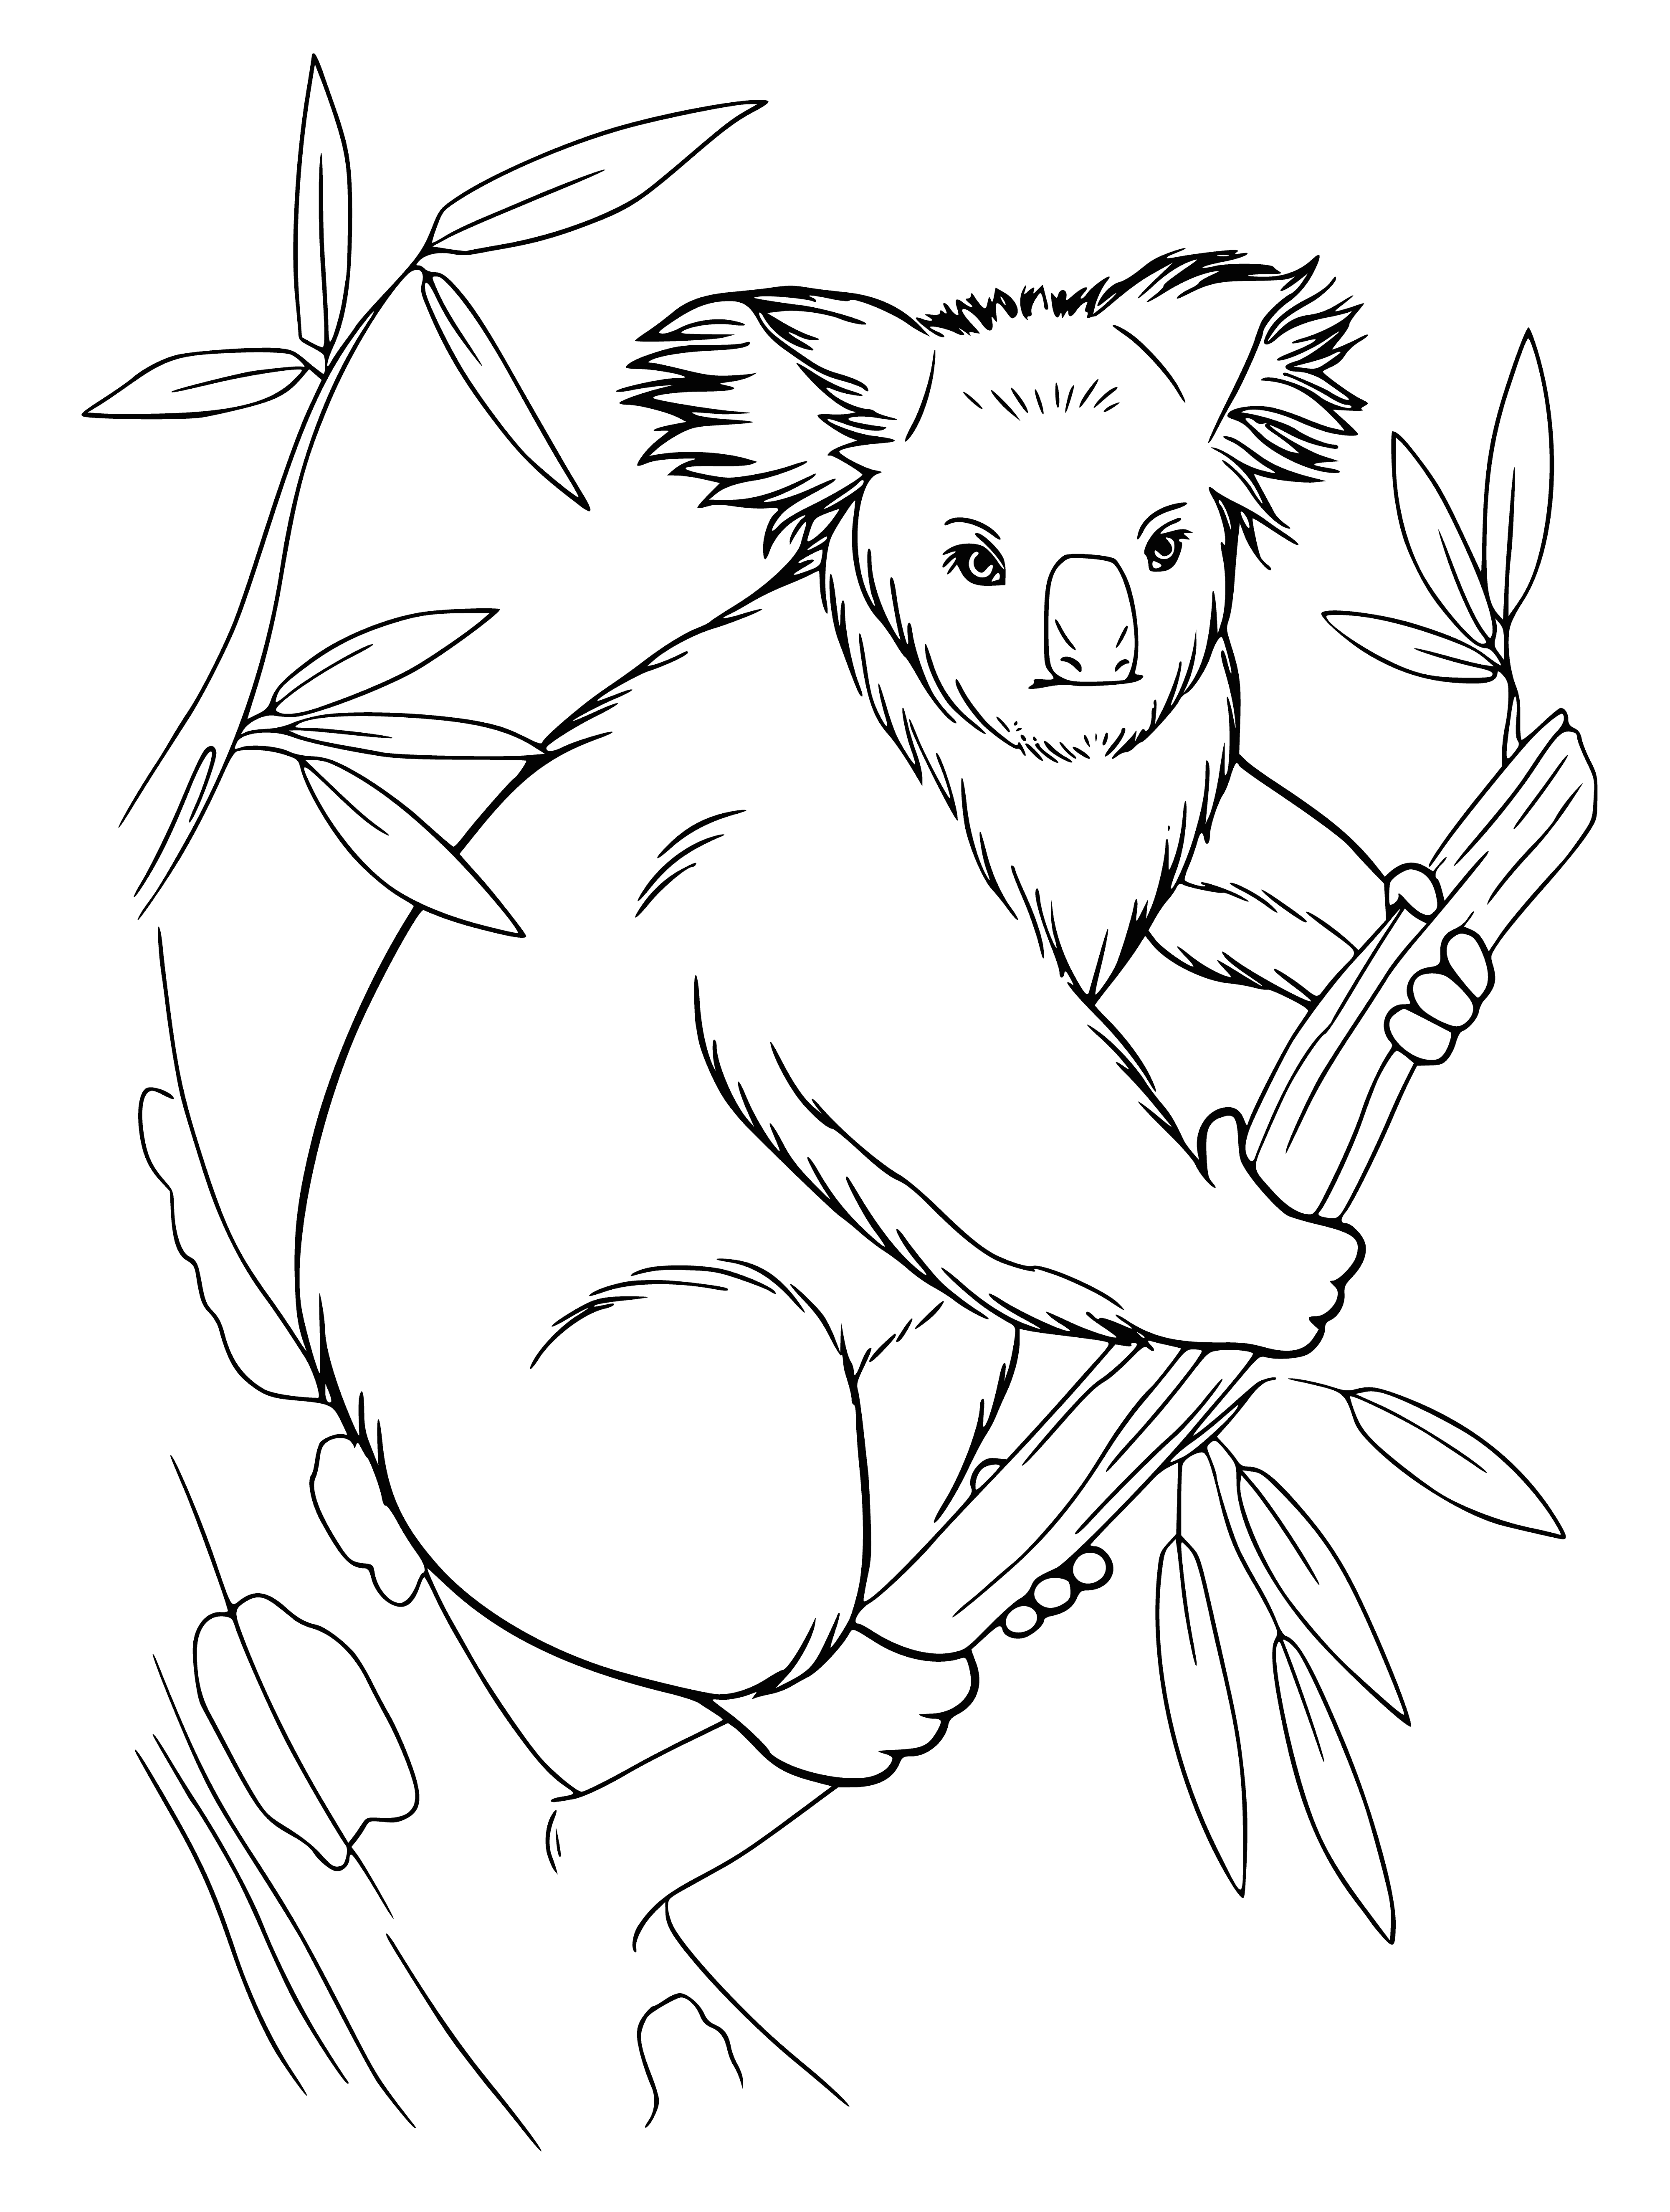 coloring page: A Koala sits atop a branch, gray fur and black eyes. Nose pink, small round ears, gripping the branch with its claws. #animalcoloringpage